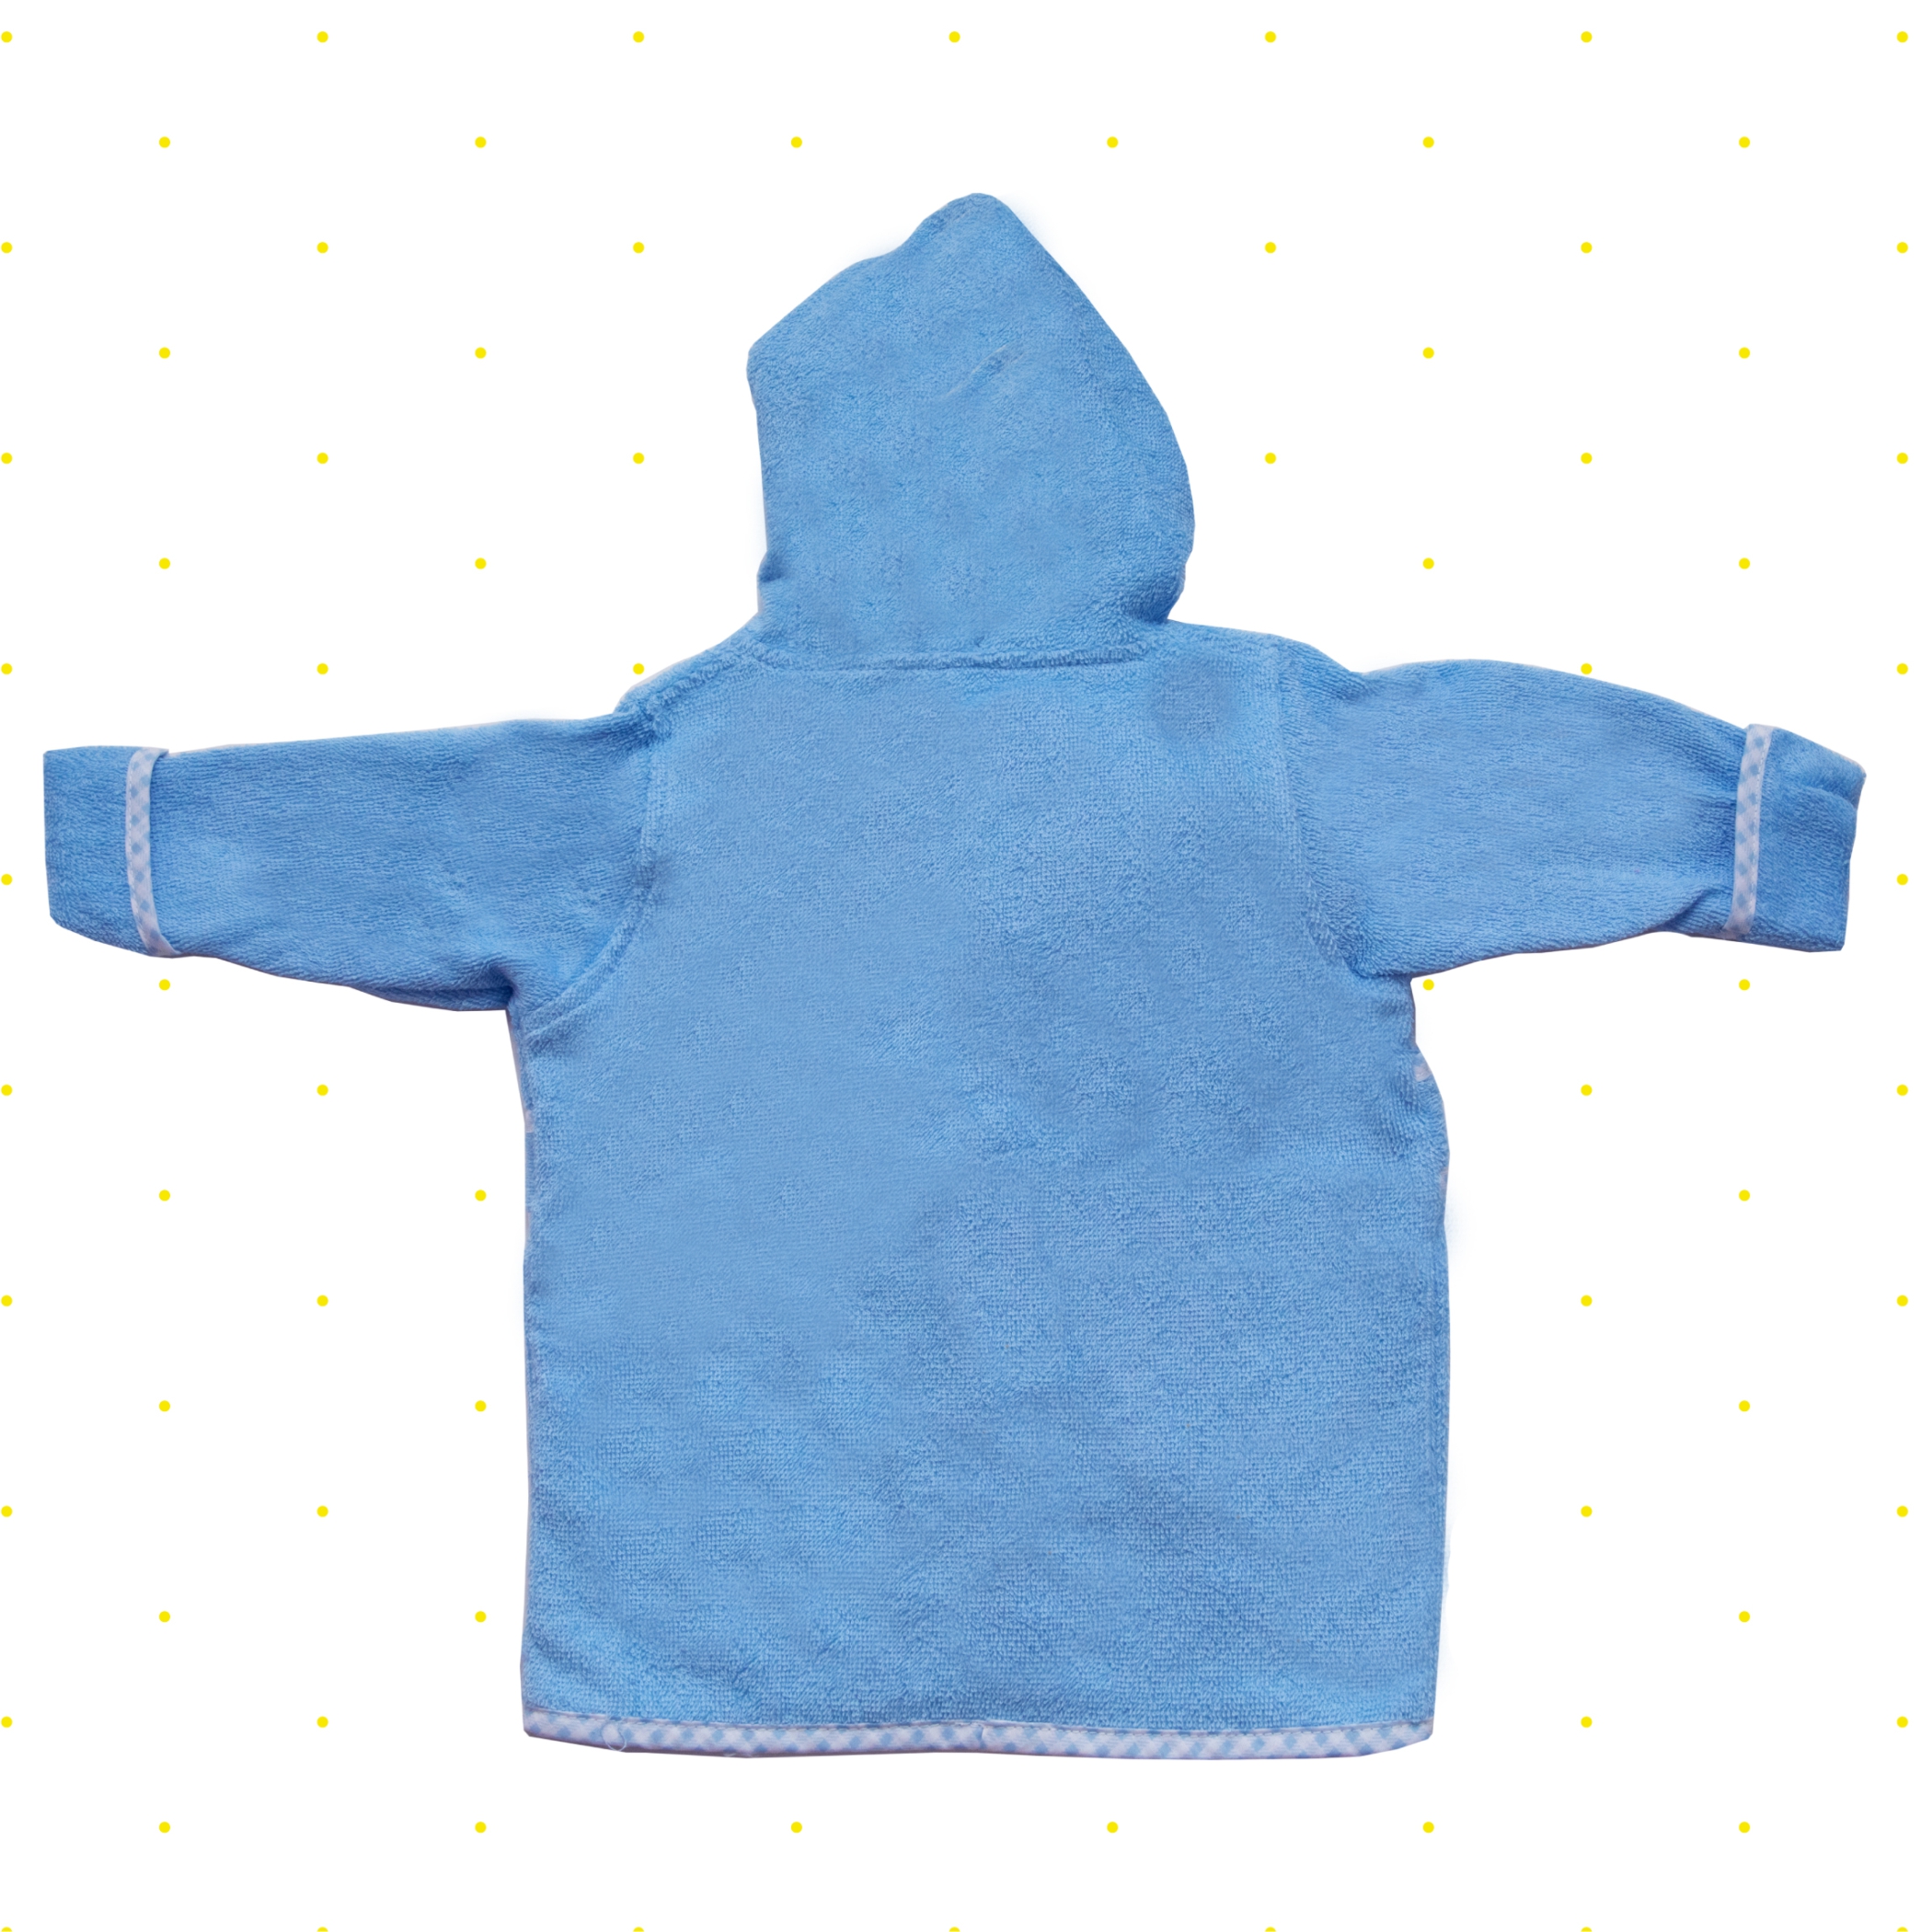 Spasilk Baby Hooded Bathrobe with Booties, Cotton Terry Bath Set for Newborns and Infants, Blue Plane - image 3 of 7